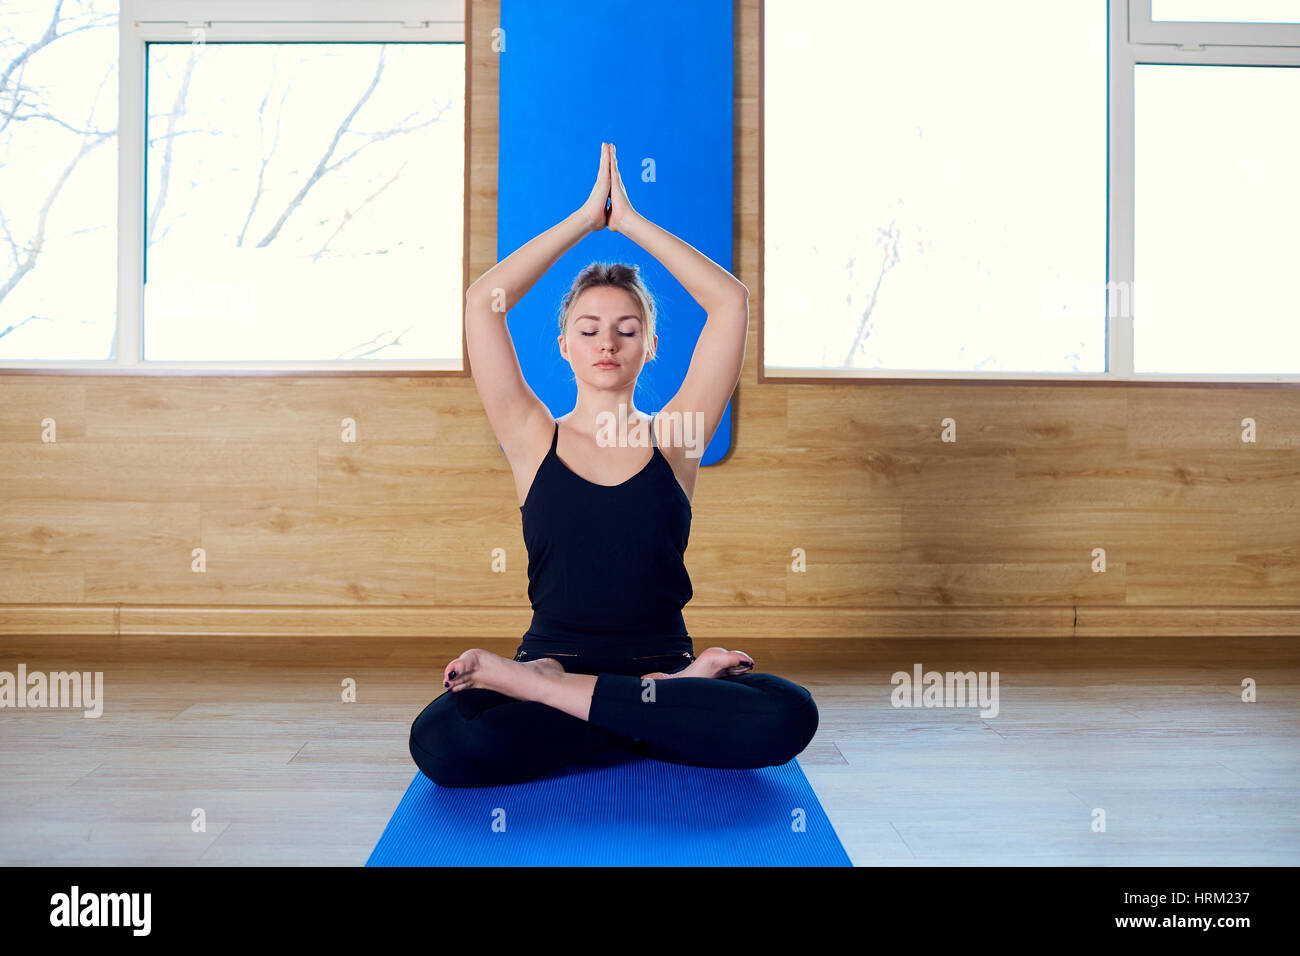 Girl sitting in a yoga pose gym. Relaxation meditation health Stock Photo